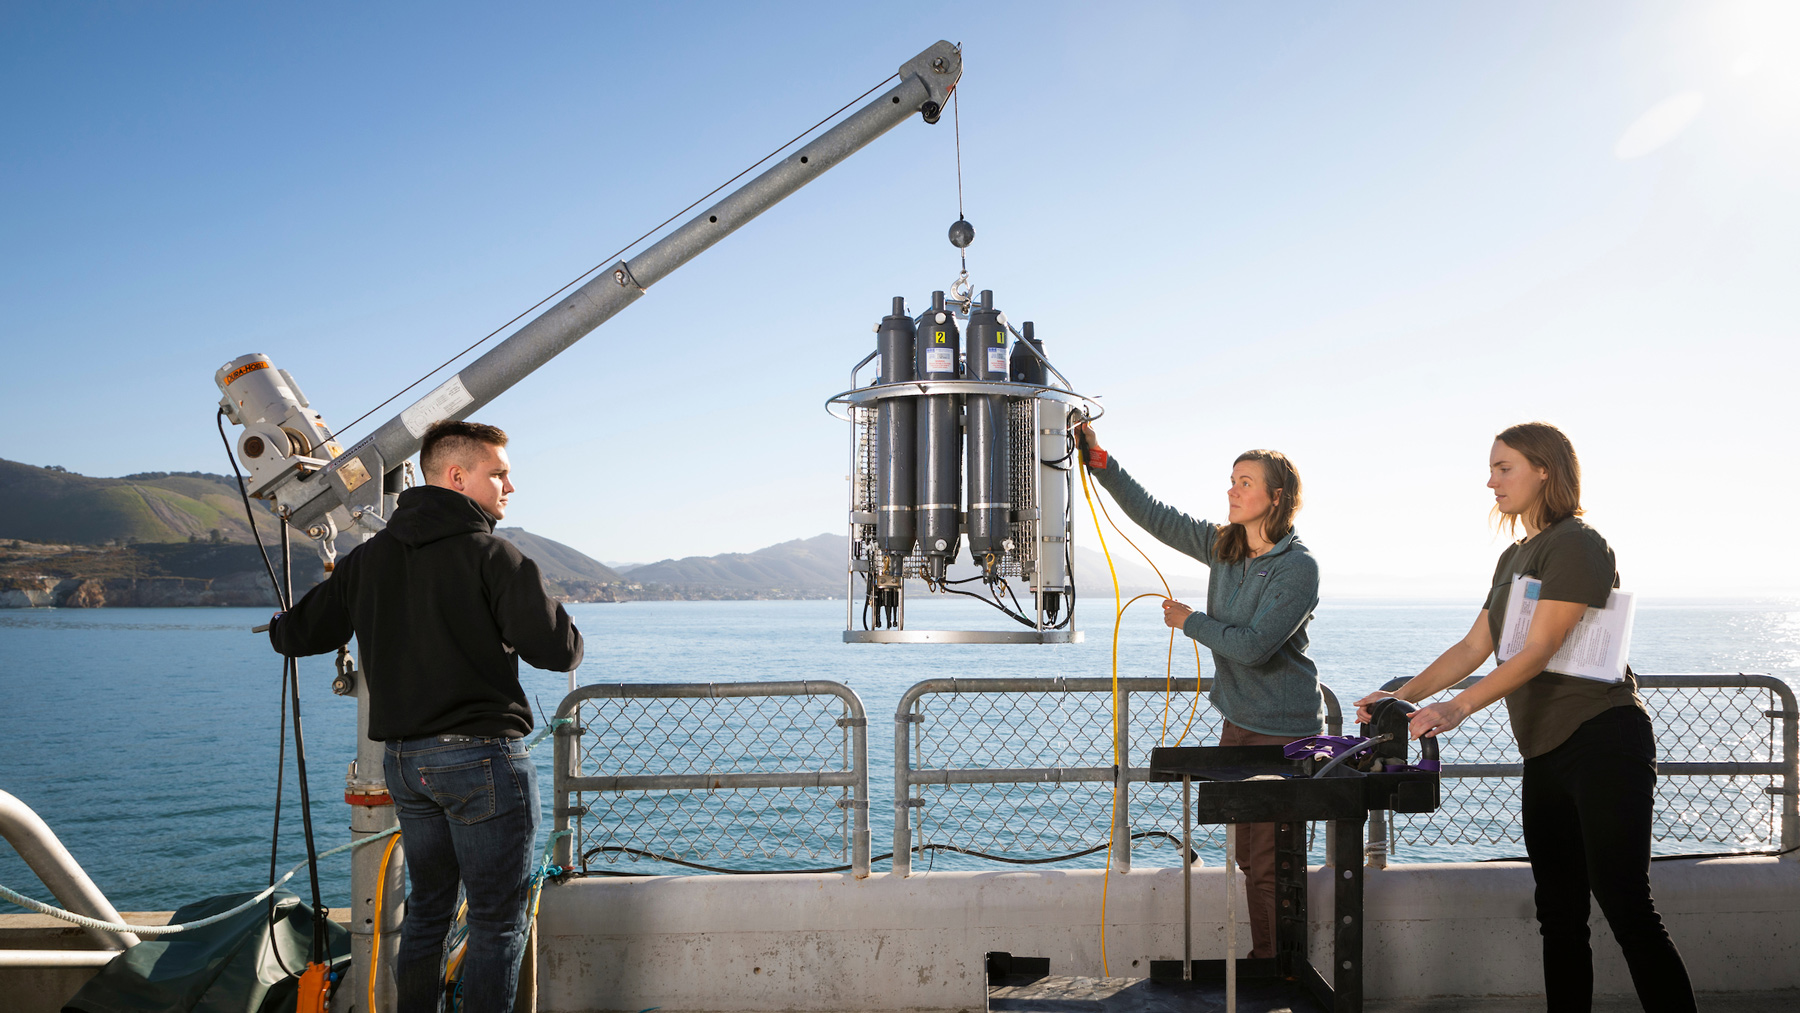 Three people lift machinery with a crane on the Cal Poly Pier